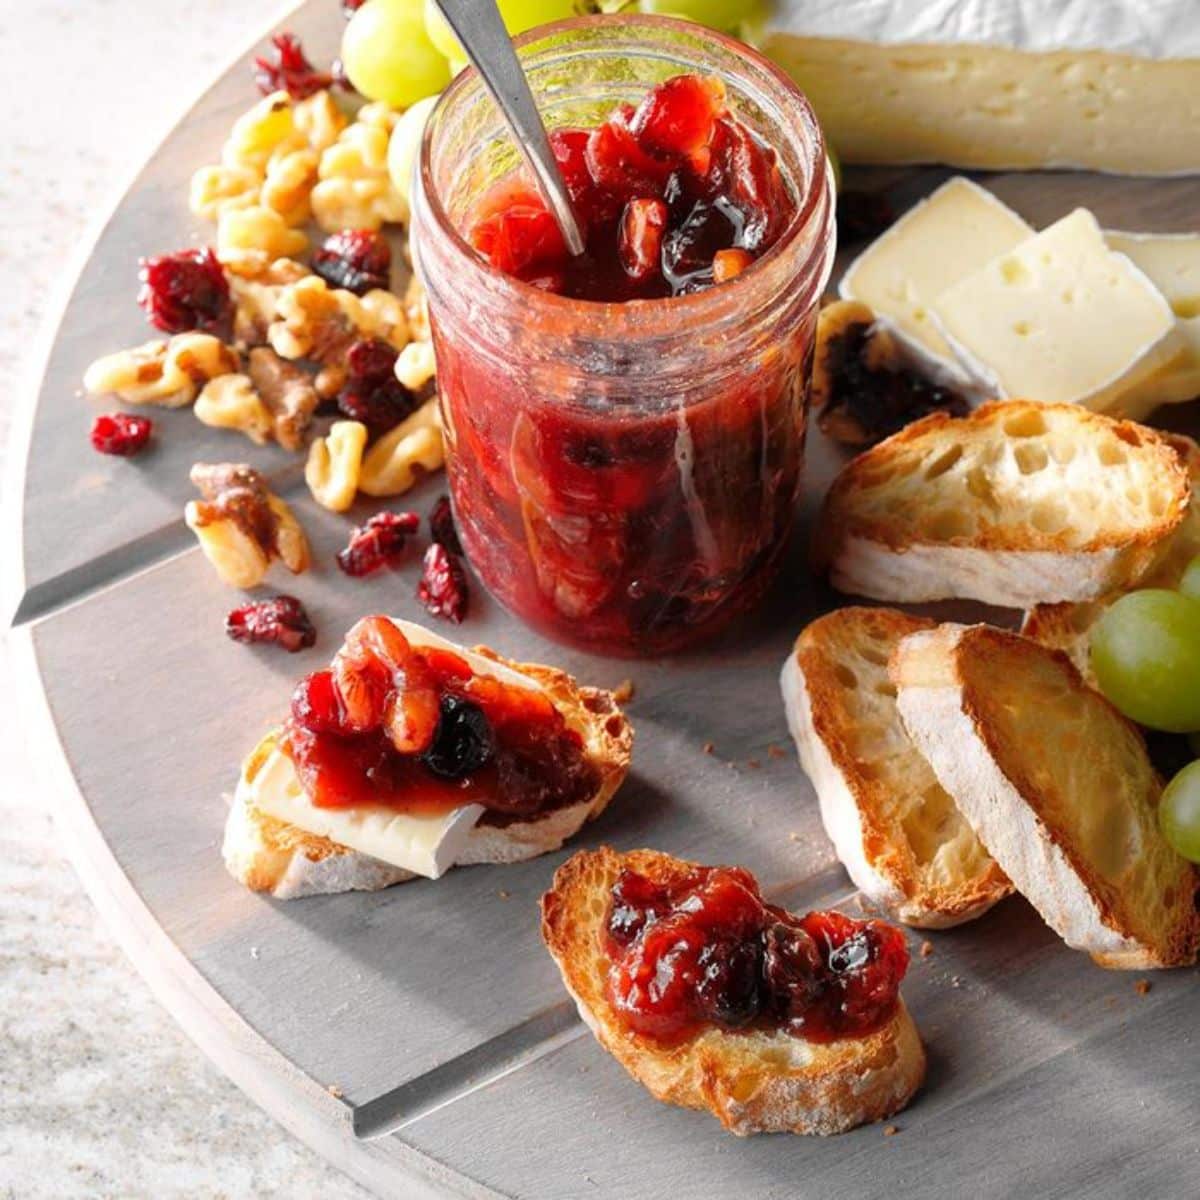 Plum conserve in a glass jar and on pieces of bread on a tray.